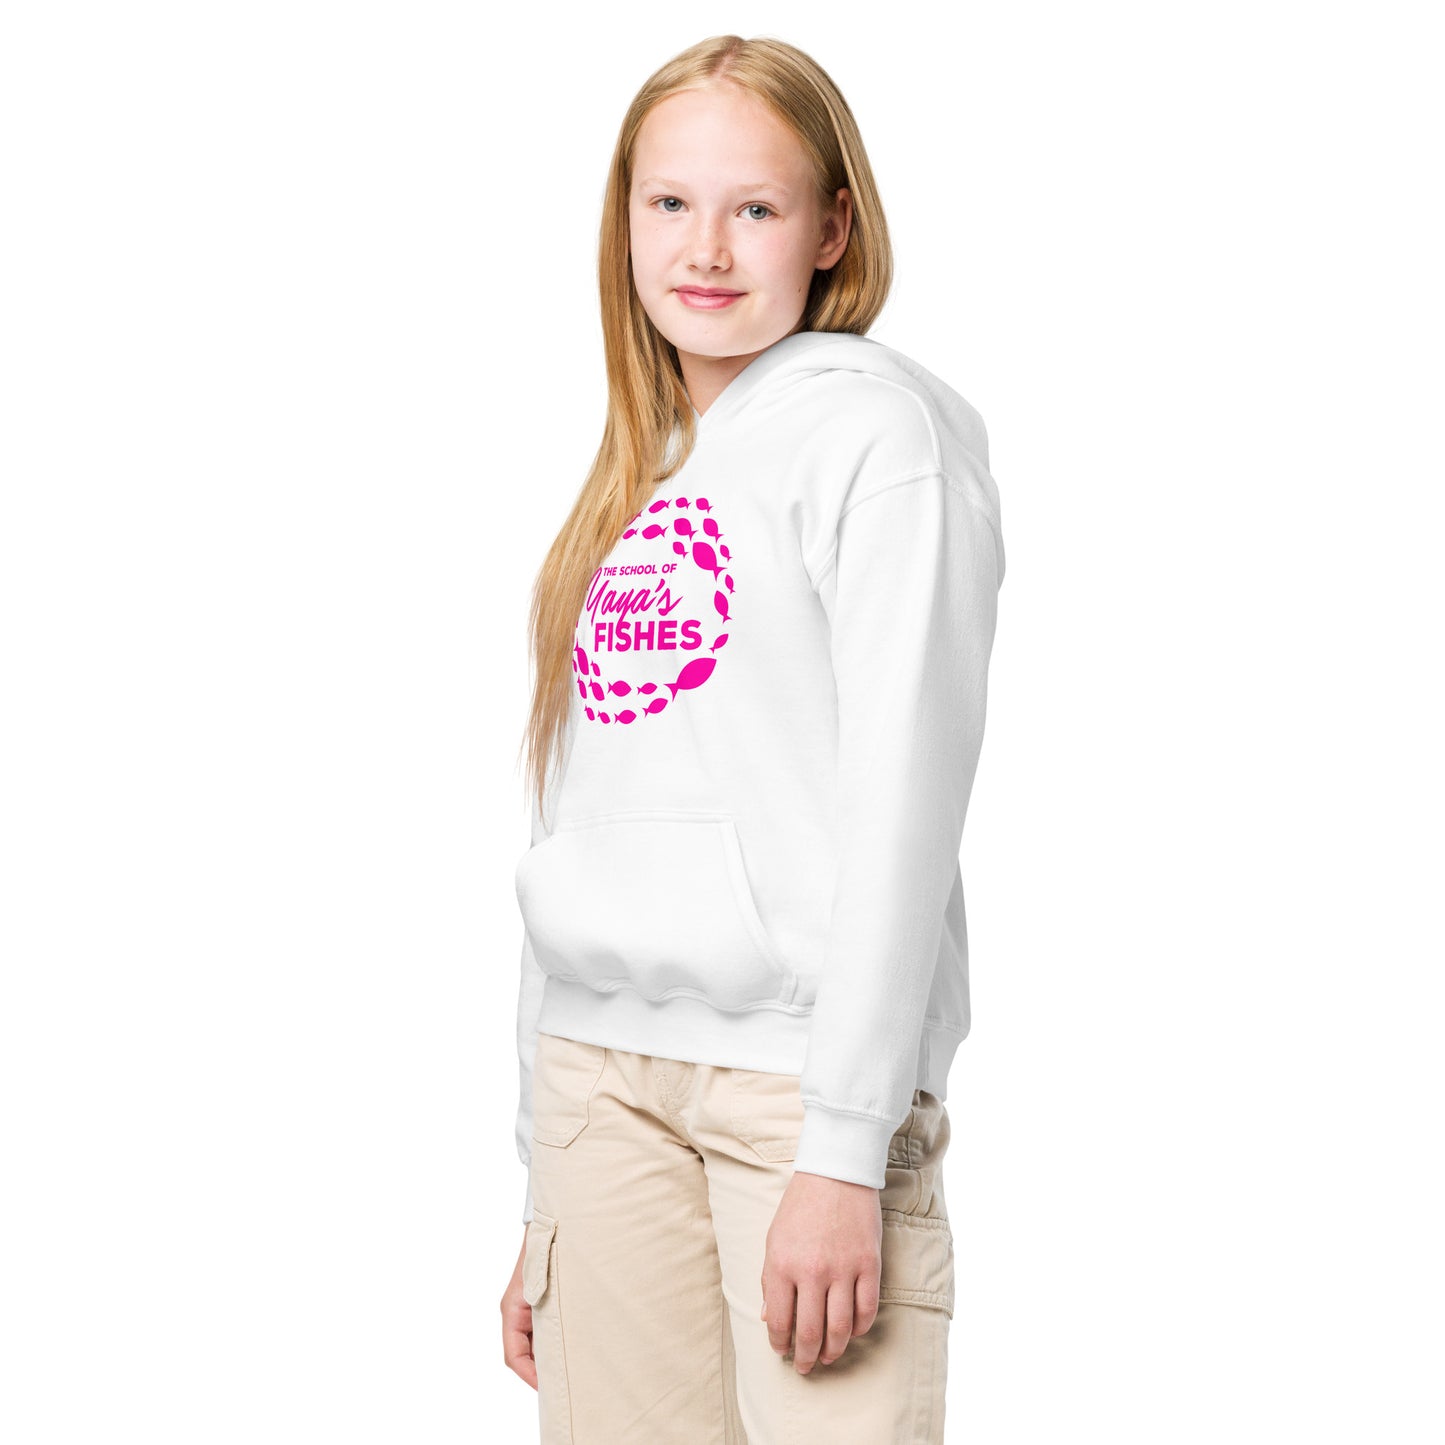 Kids Hoodie - White with Pink Logo